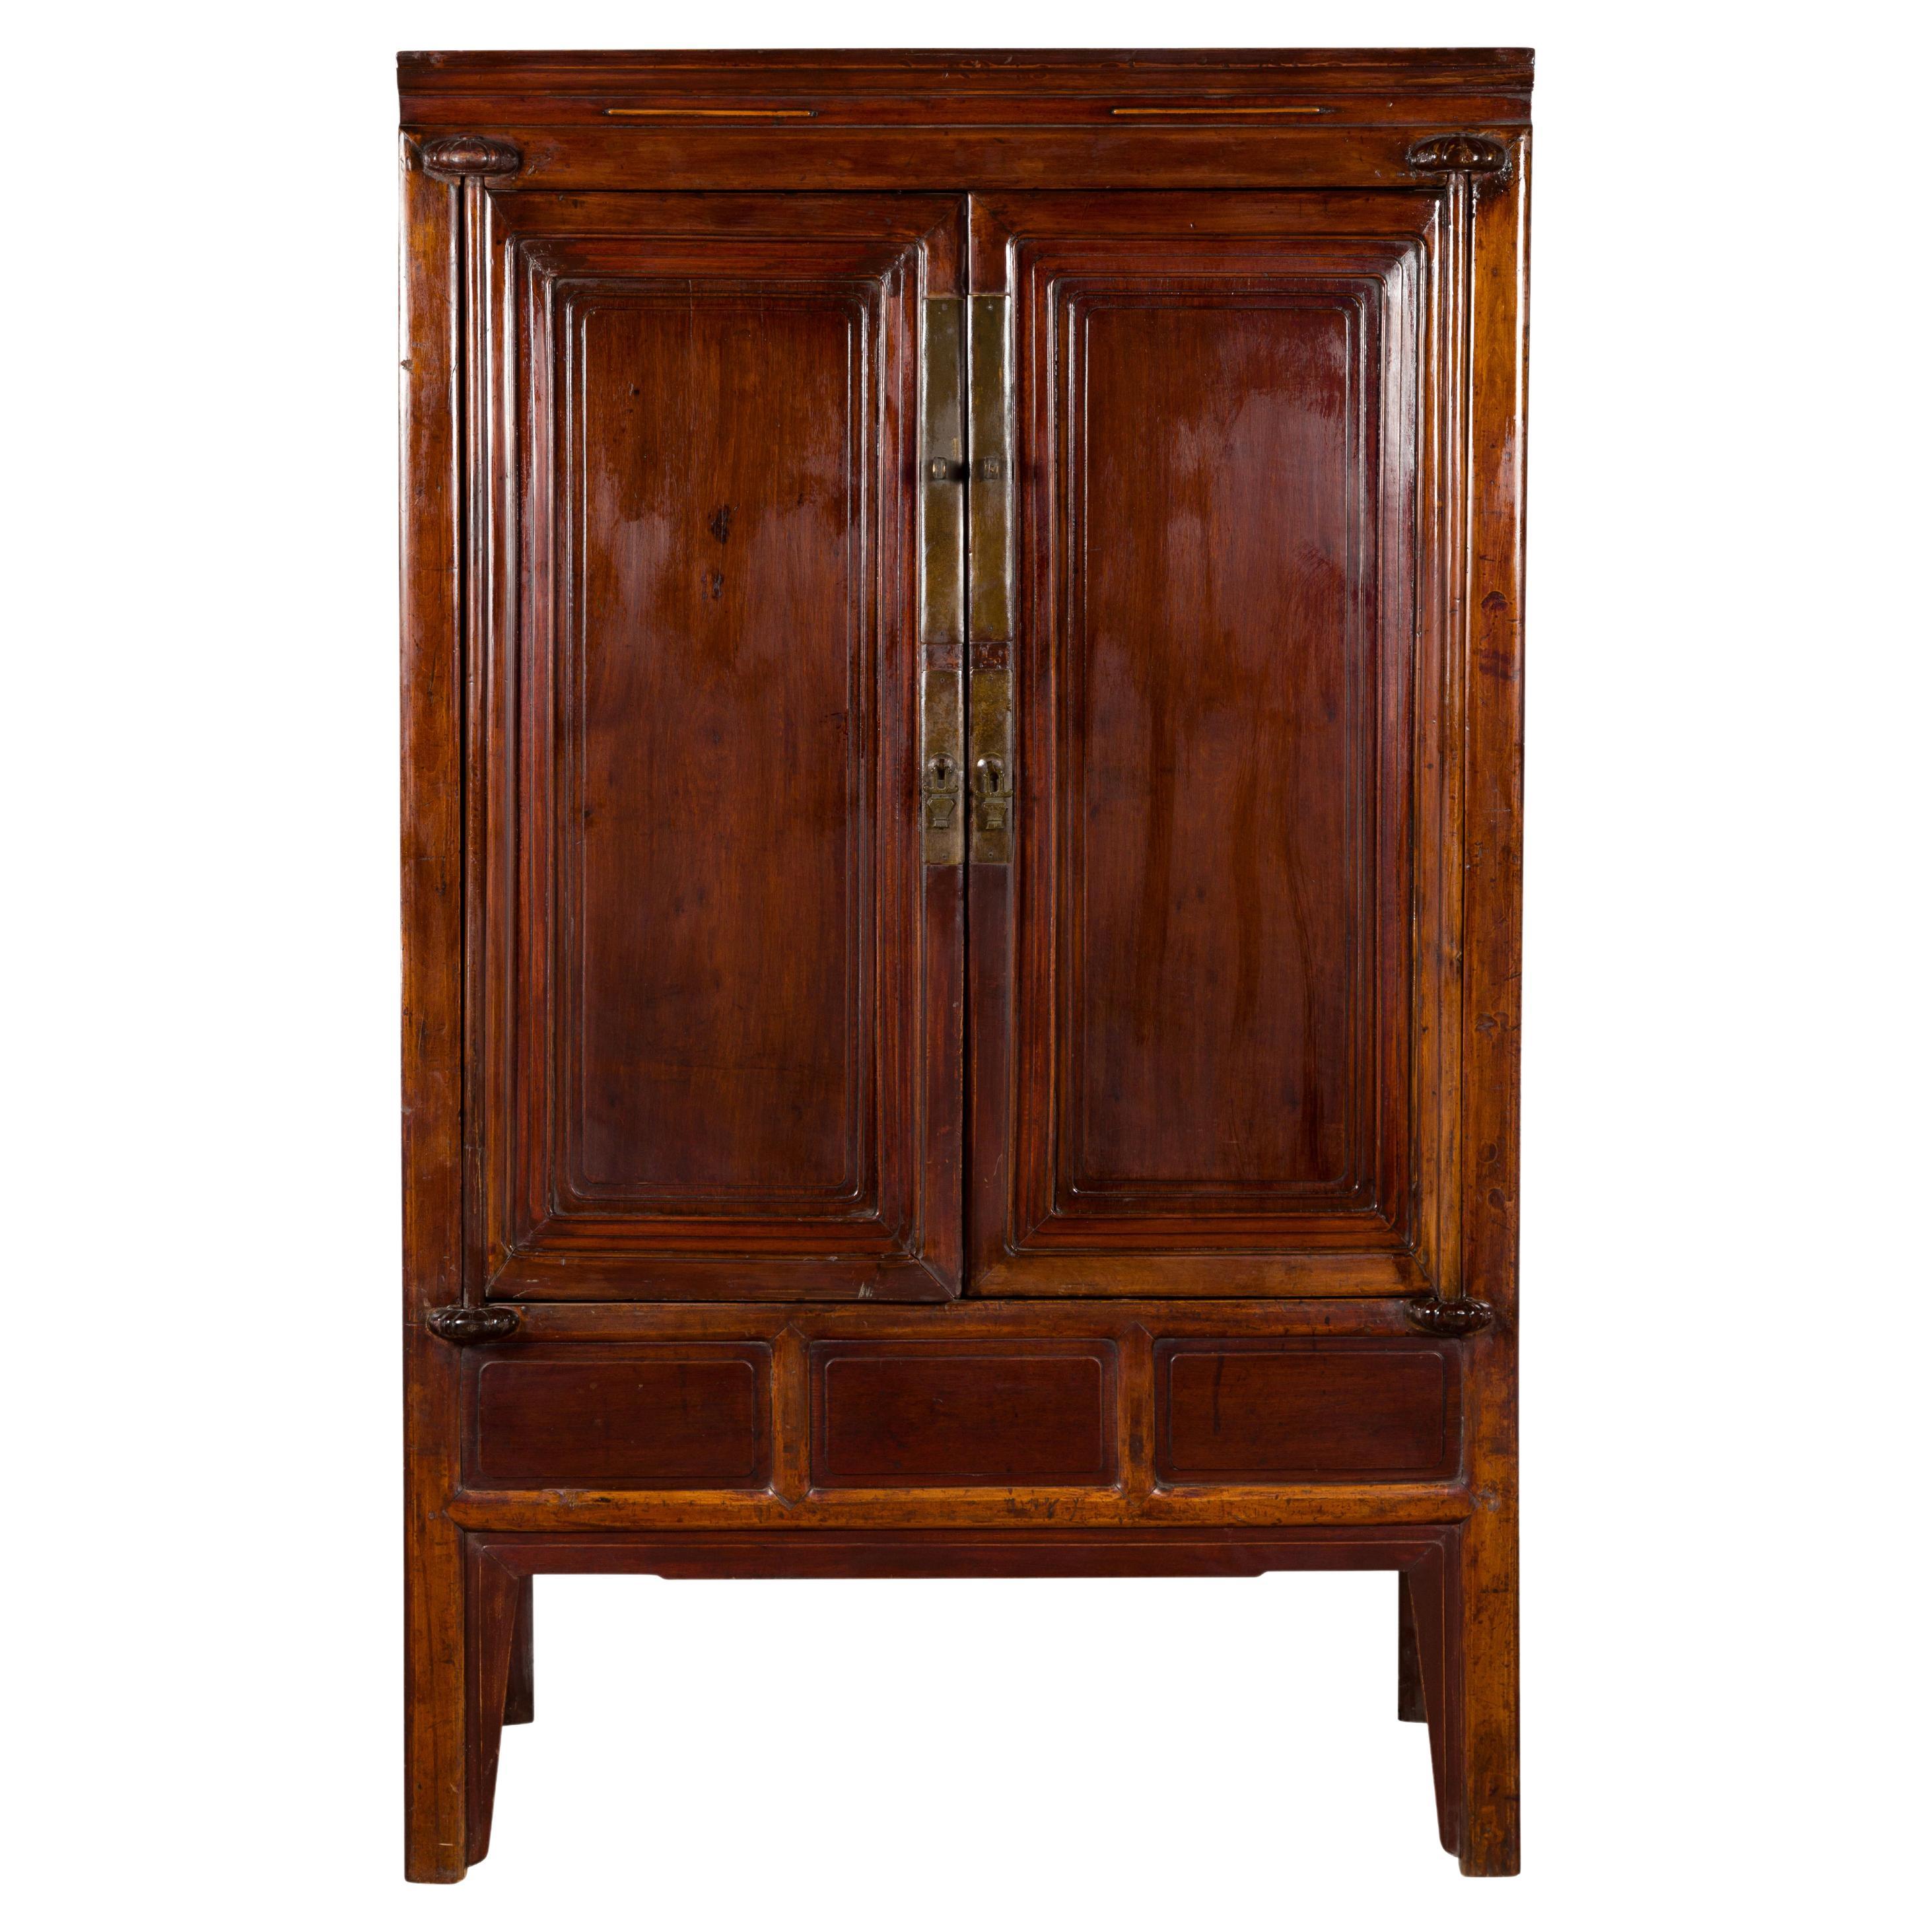 Chinese Qing Dynasty 19th Century Ningbo Cypress Cabinet with Brass Hardware